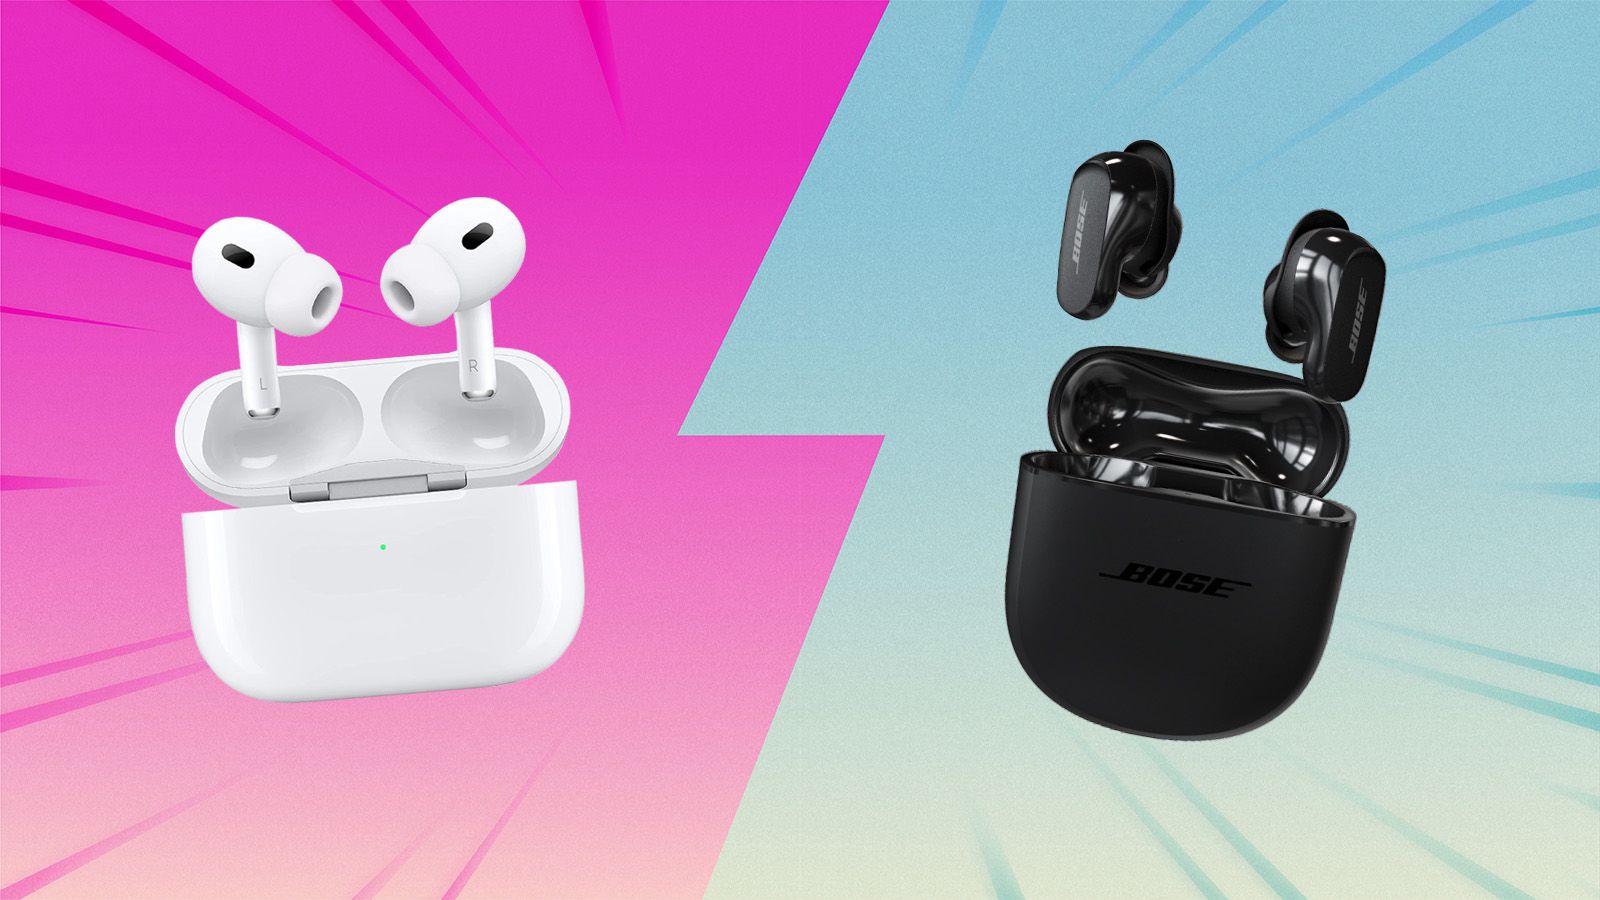 Review: Apple's new AirPods are a first-class update to an already